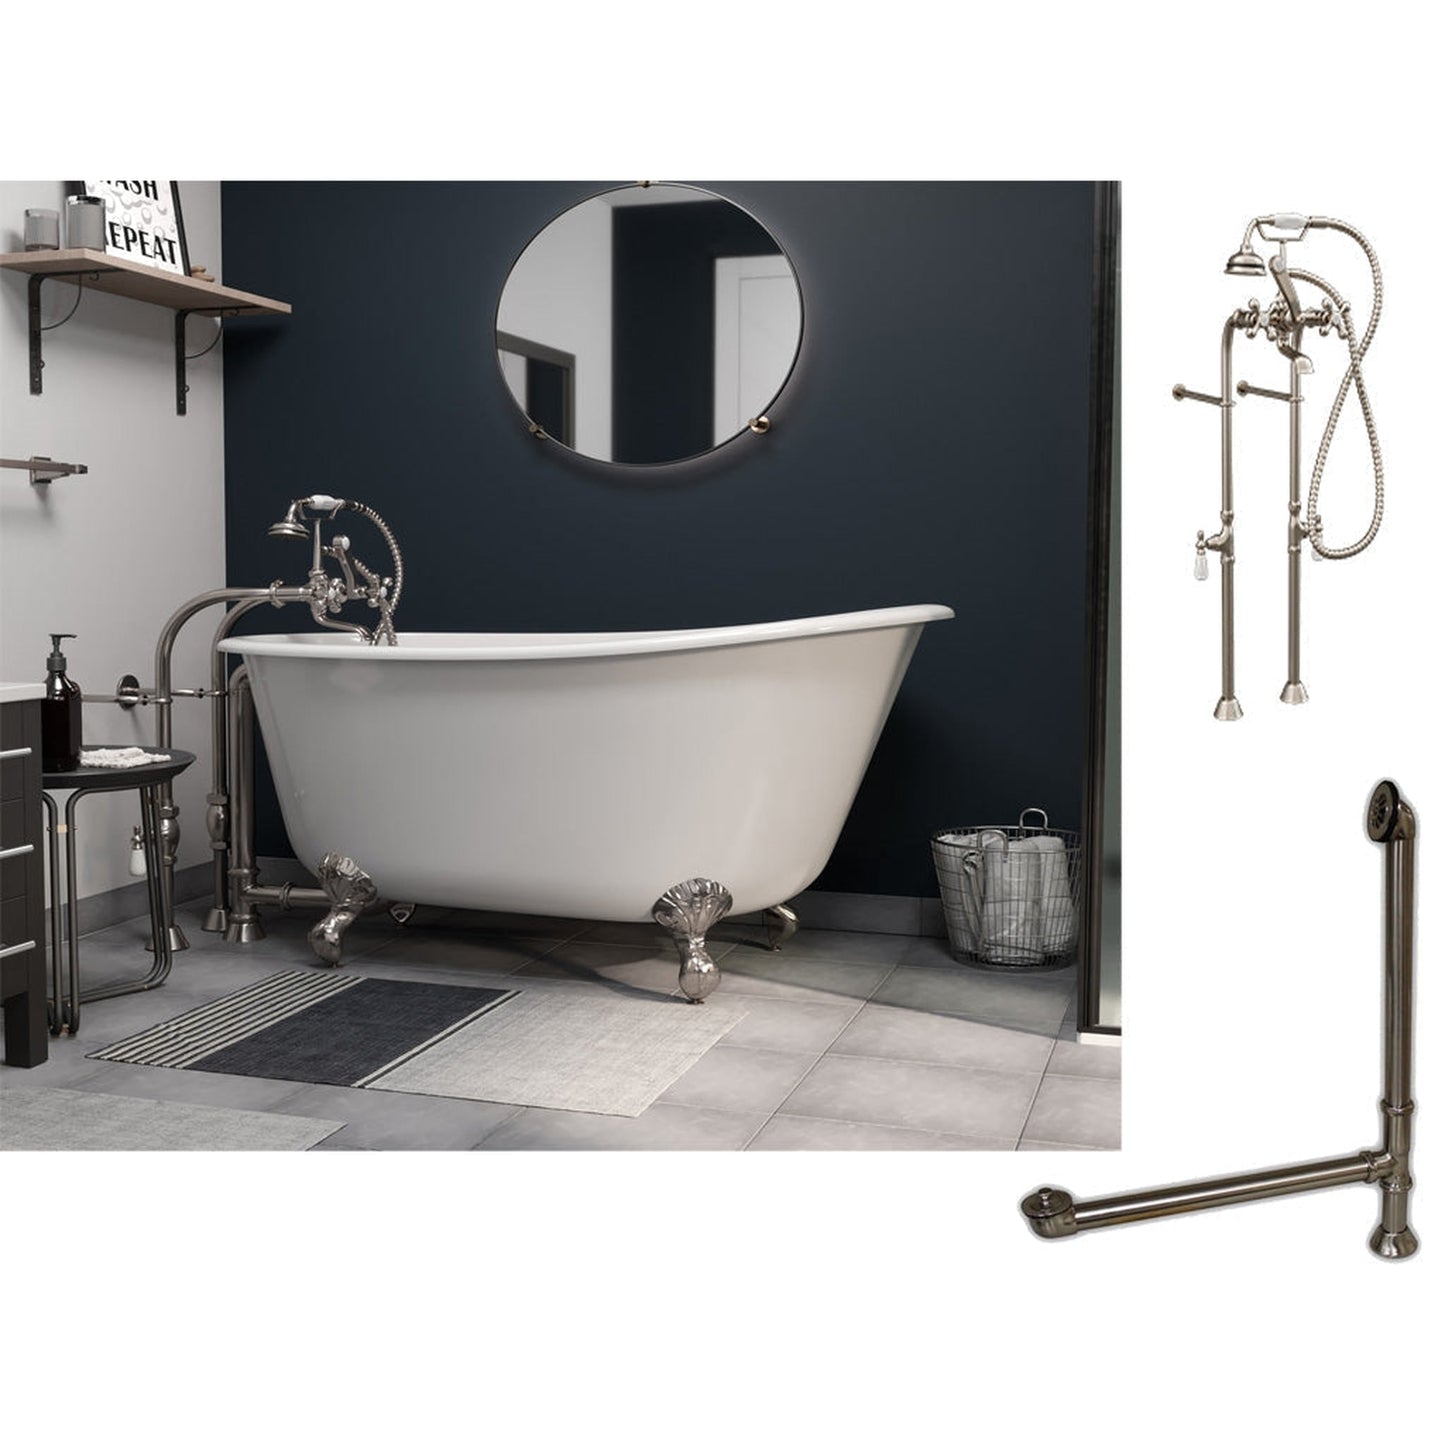 Cambridge Plumbing 54" White Cast Iron Swedish Single Slipper Clawfoot Bathtub With No Deck Holes And Complete Plumbing Package Including Modern Floor Mounted British Telephone Faucet, Drain And Overflow Assembly In Brushed Nickel